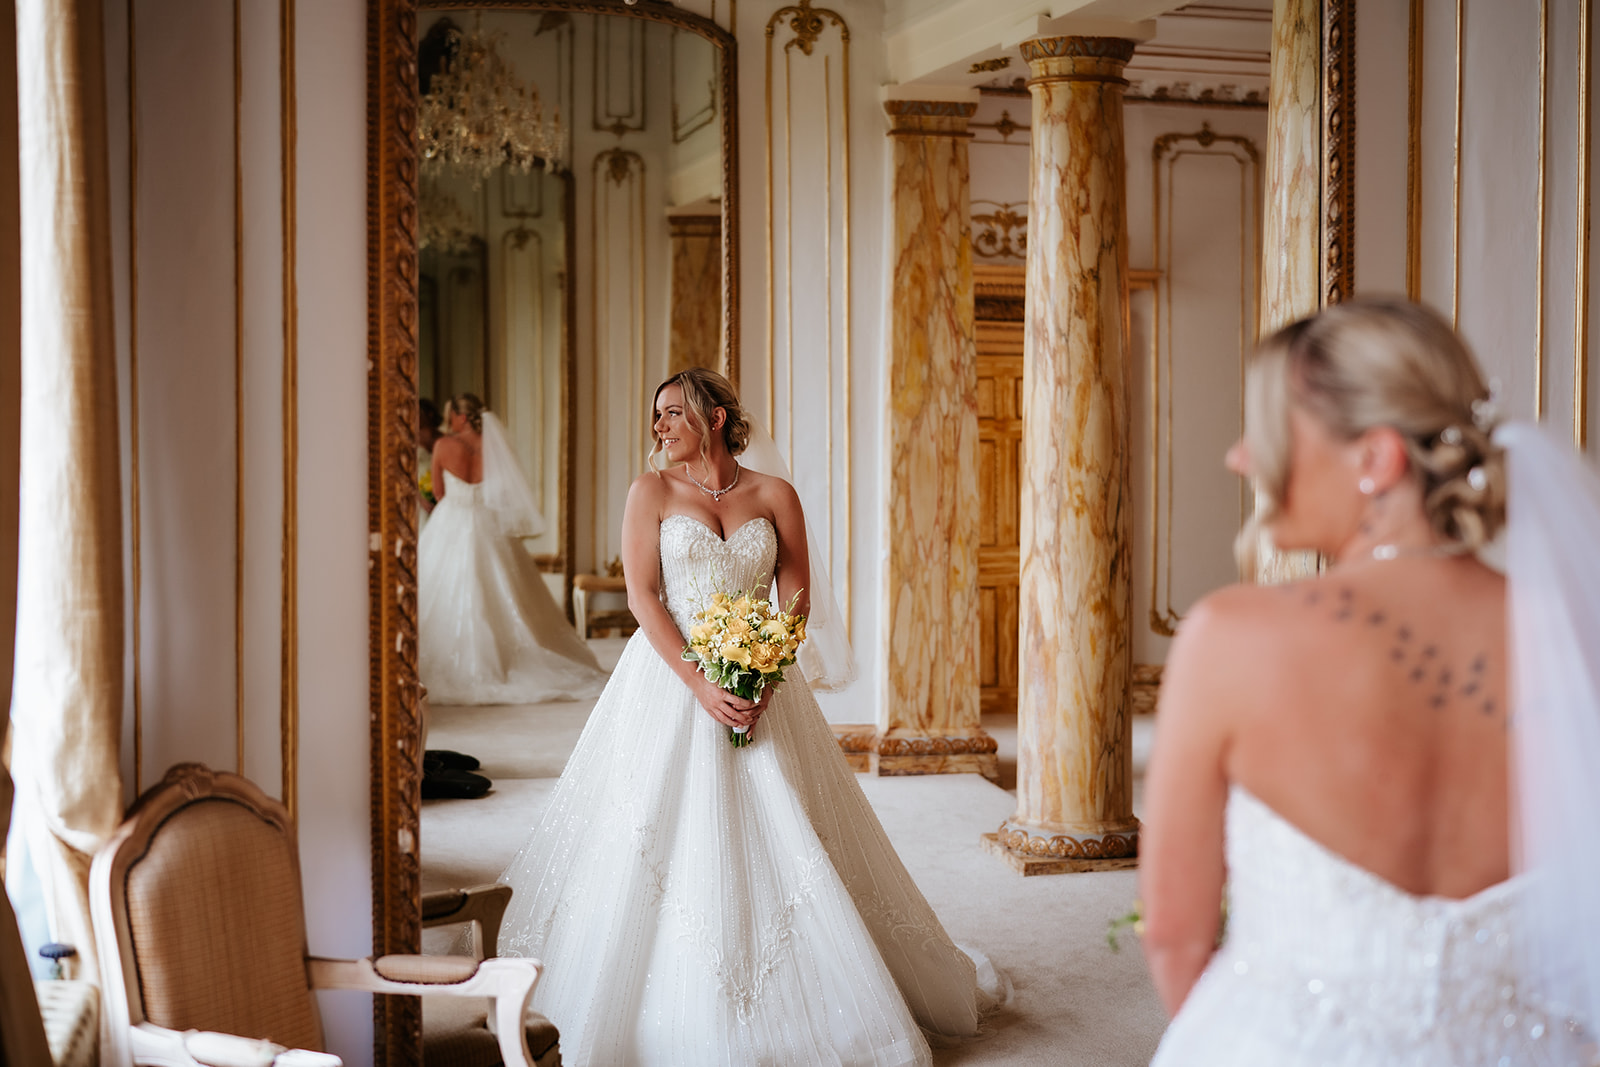 Bride and groom share a moment in the rococo bridal suite.